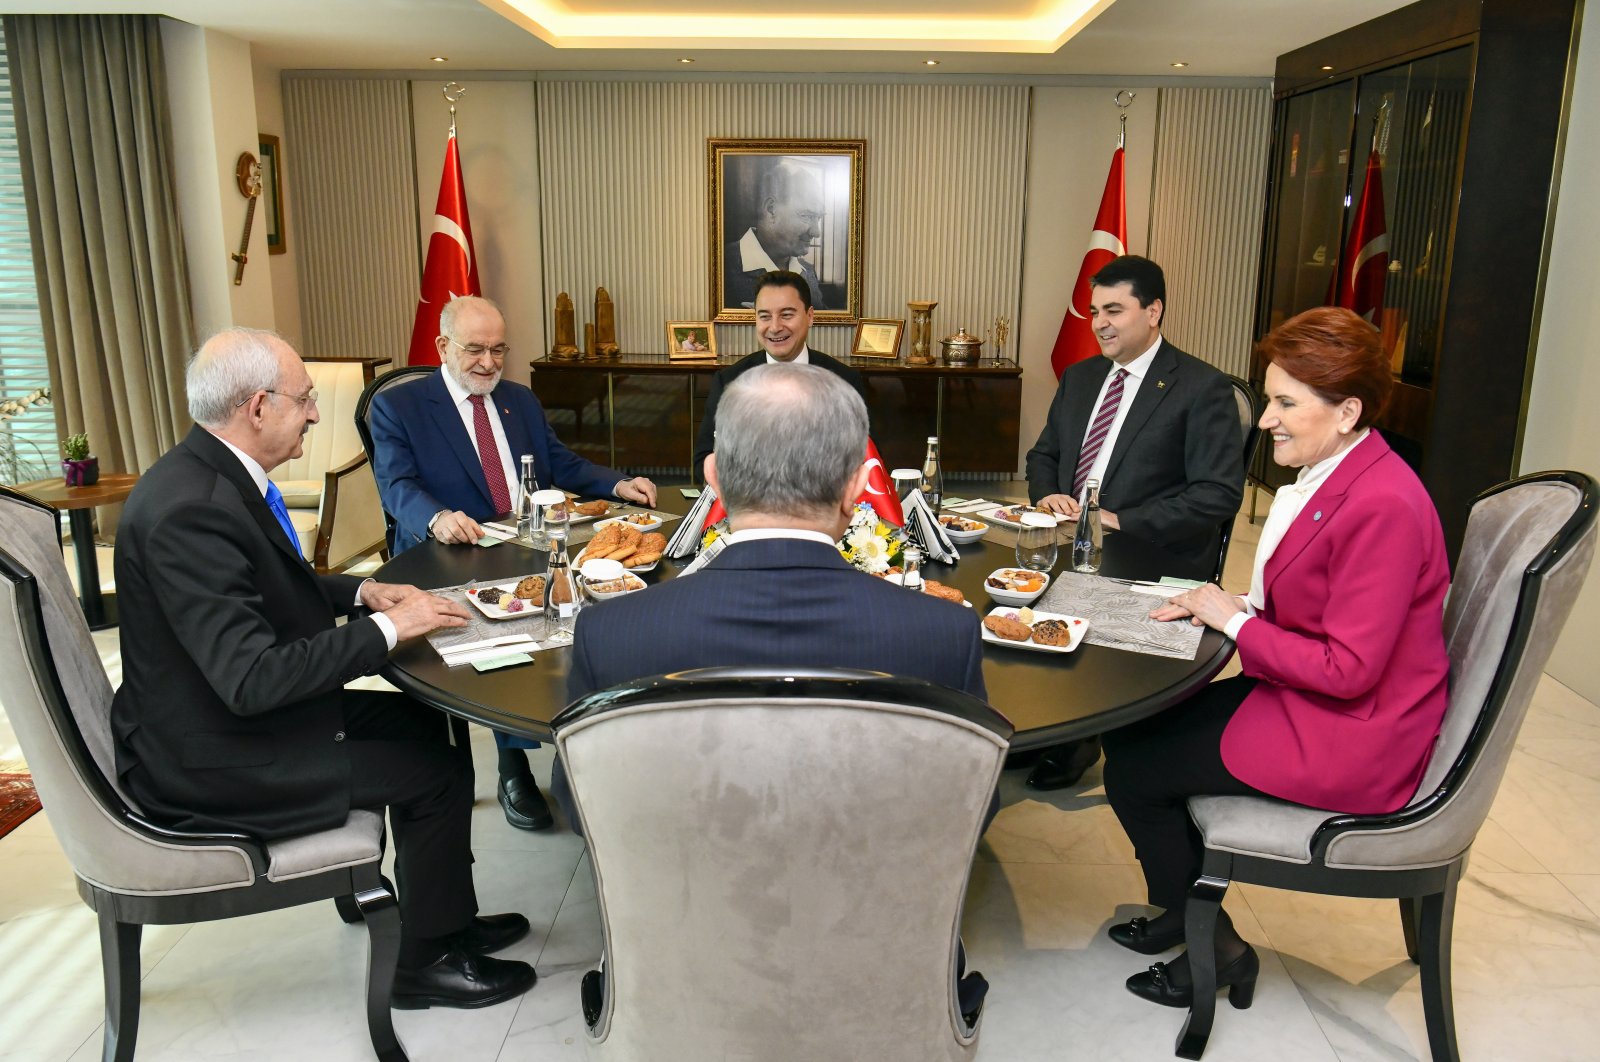 Heads of the six opposition parties making up the "table for six" during their meeting in Ankara, Türkiye, Jan. 26, 2023. (EPA Photo)